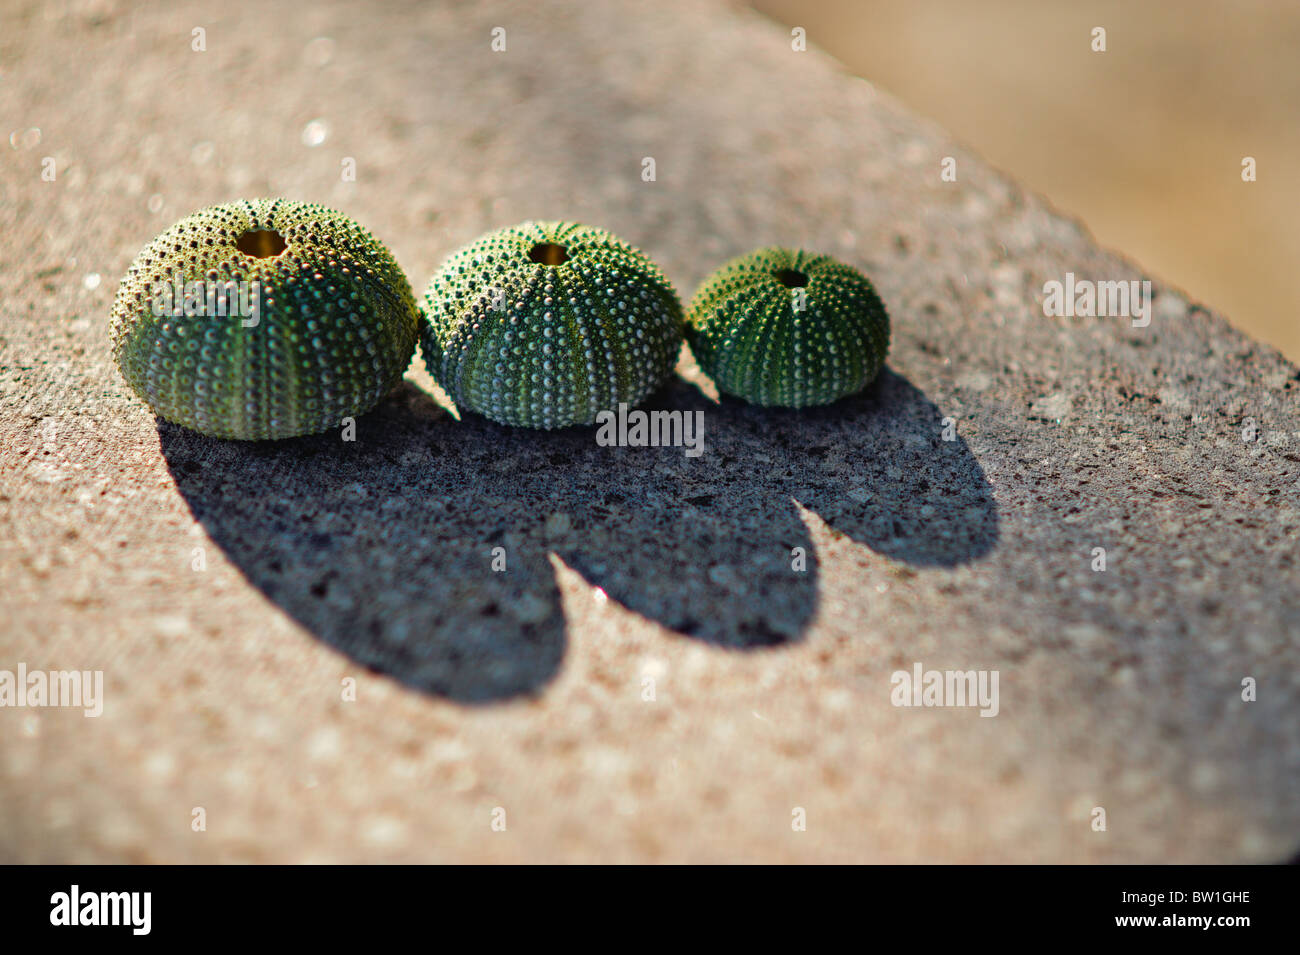 Three dried sea urchins found in the Aegean. Stock Photo